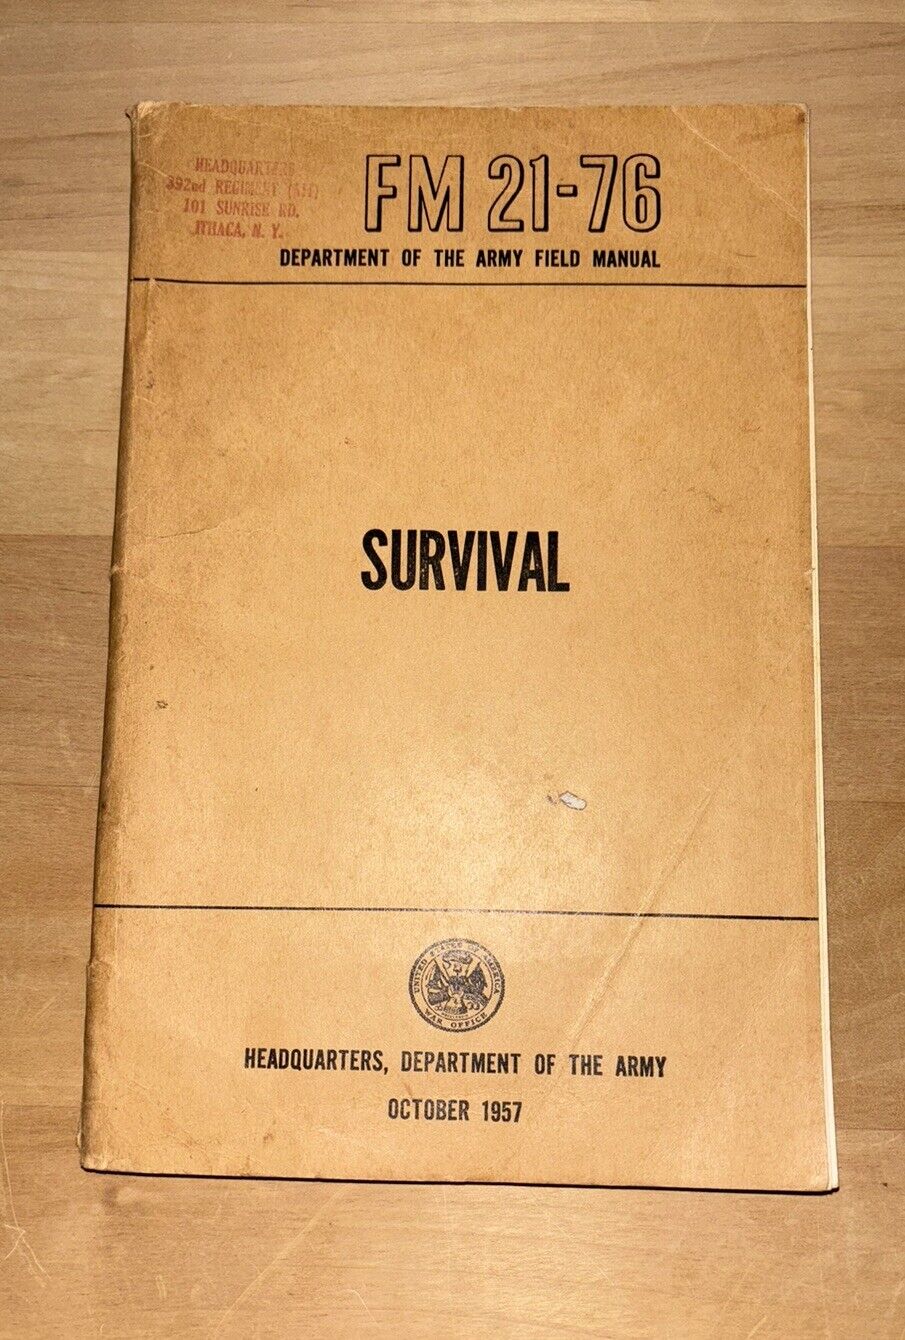 FM21-76 SURVIVAL US Army Field Manual Training Department of Army October 1957